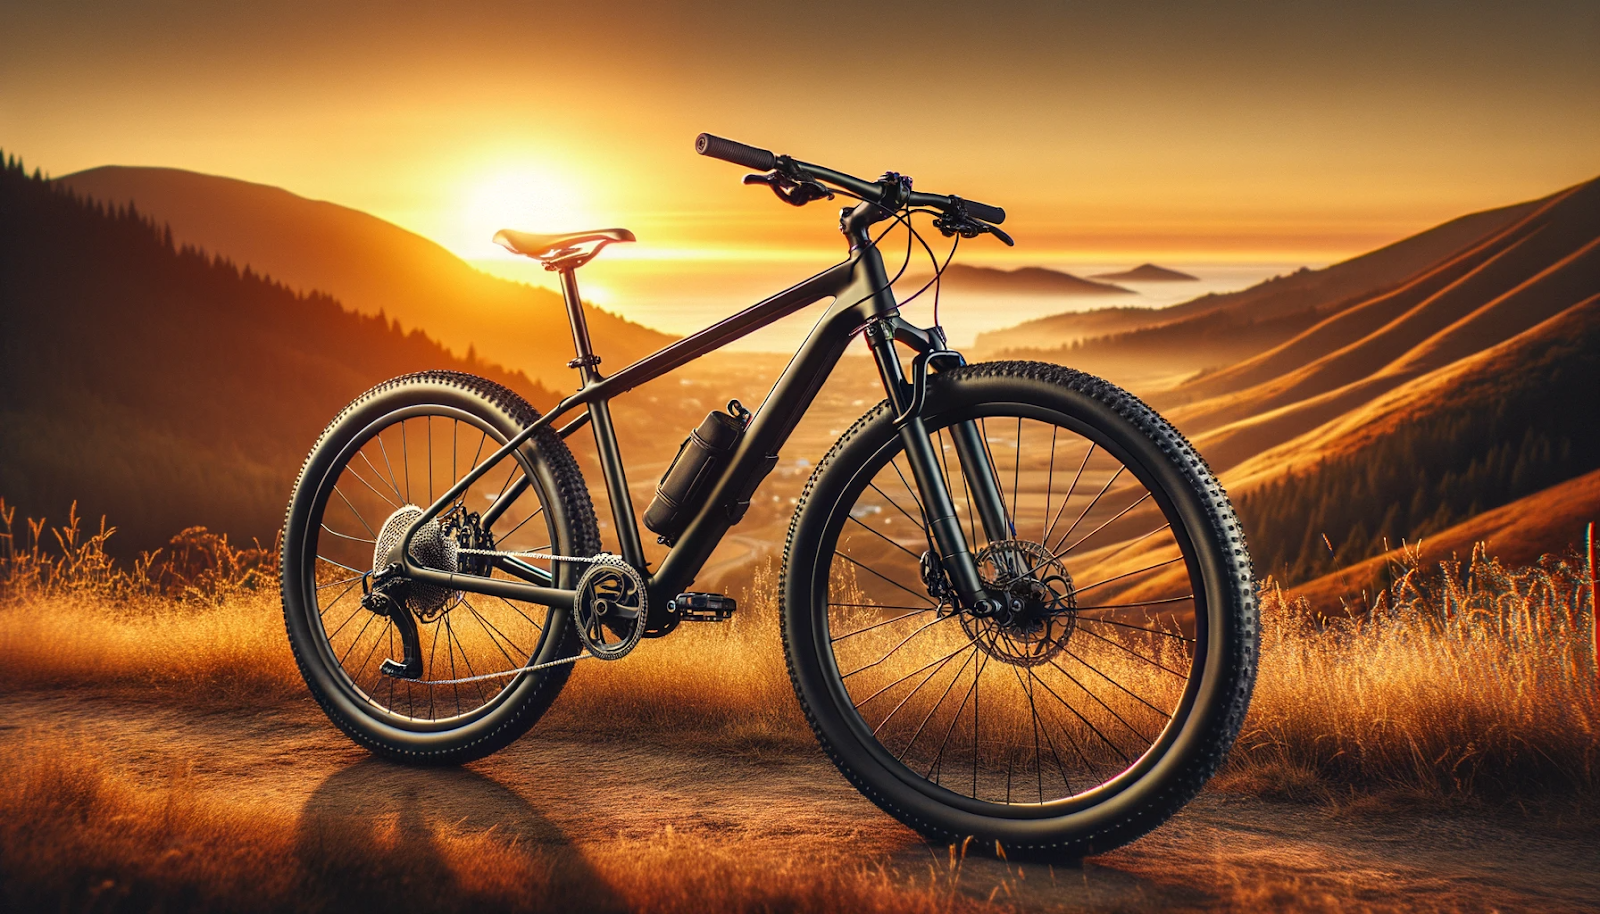 Hybrid bike showcased against a scenic backdrop with the setting sun casting a warm glow, emphasizing its medium-weight frame, flat handlebars, and unique tire width.